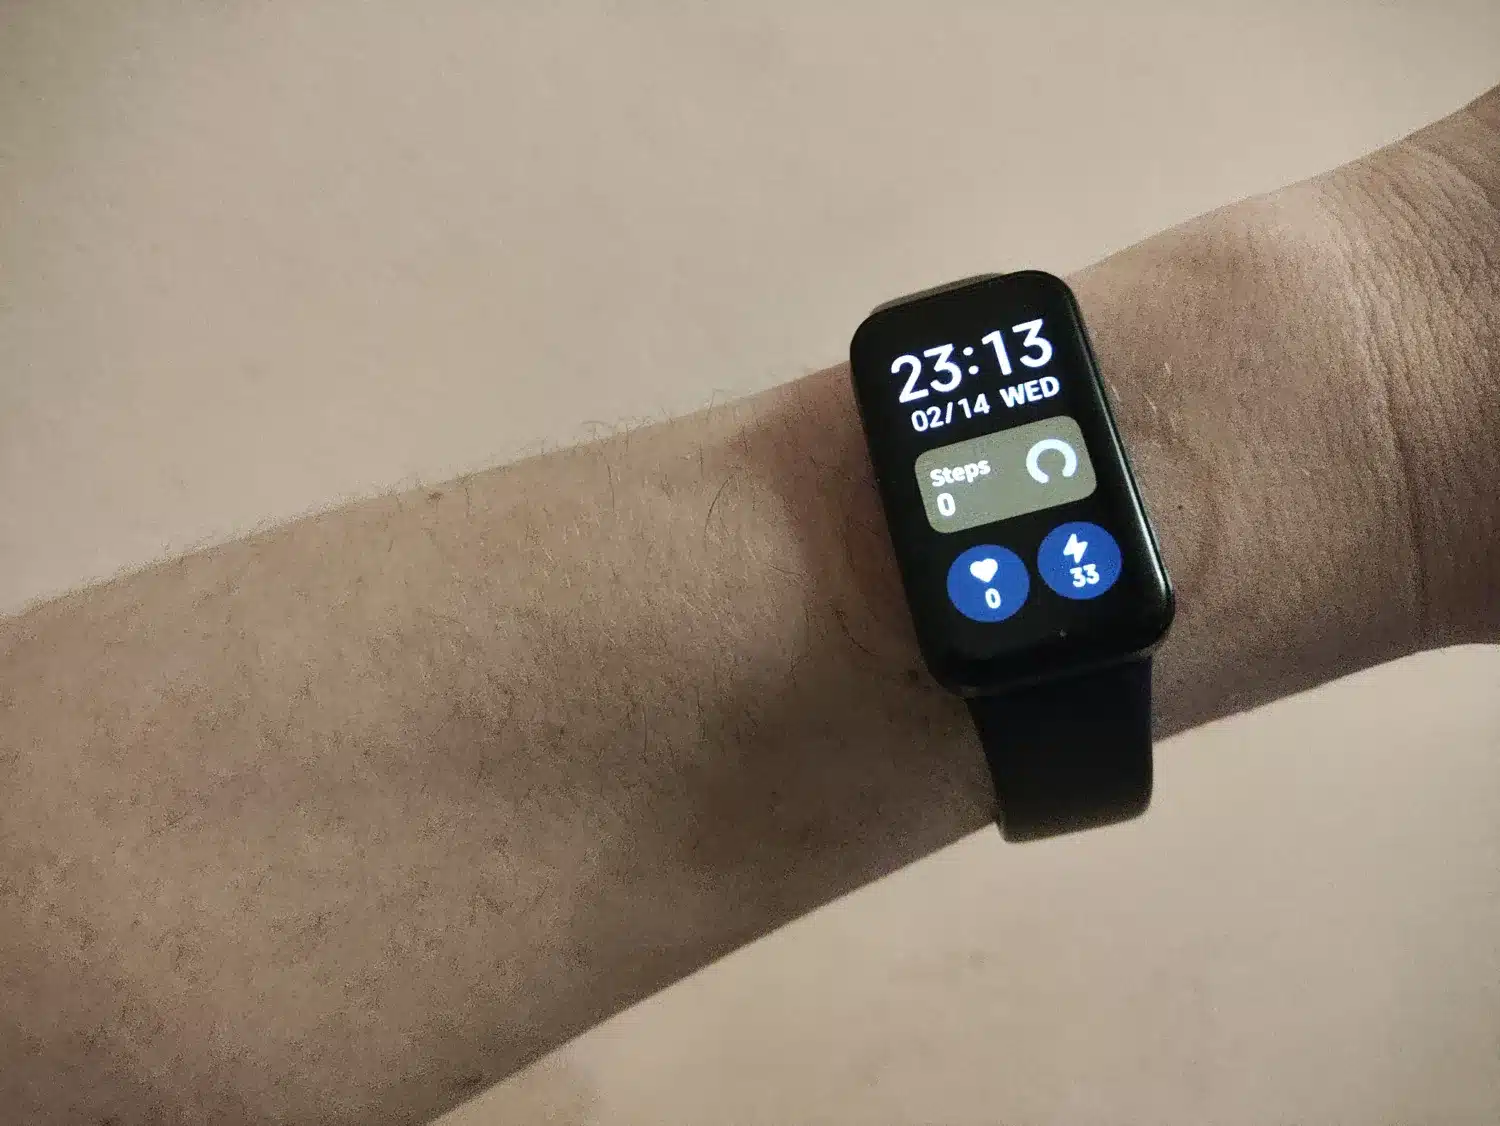 Xiaomi Redmi Smart Band Pro favorite watch face on it while on hand